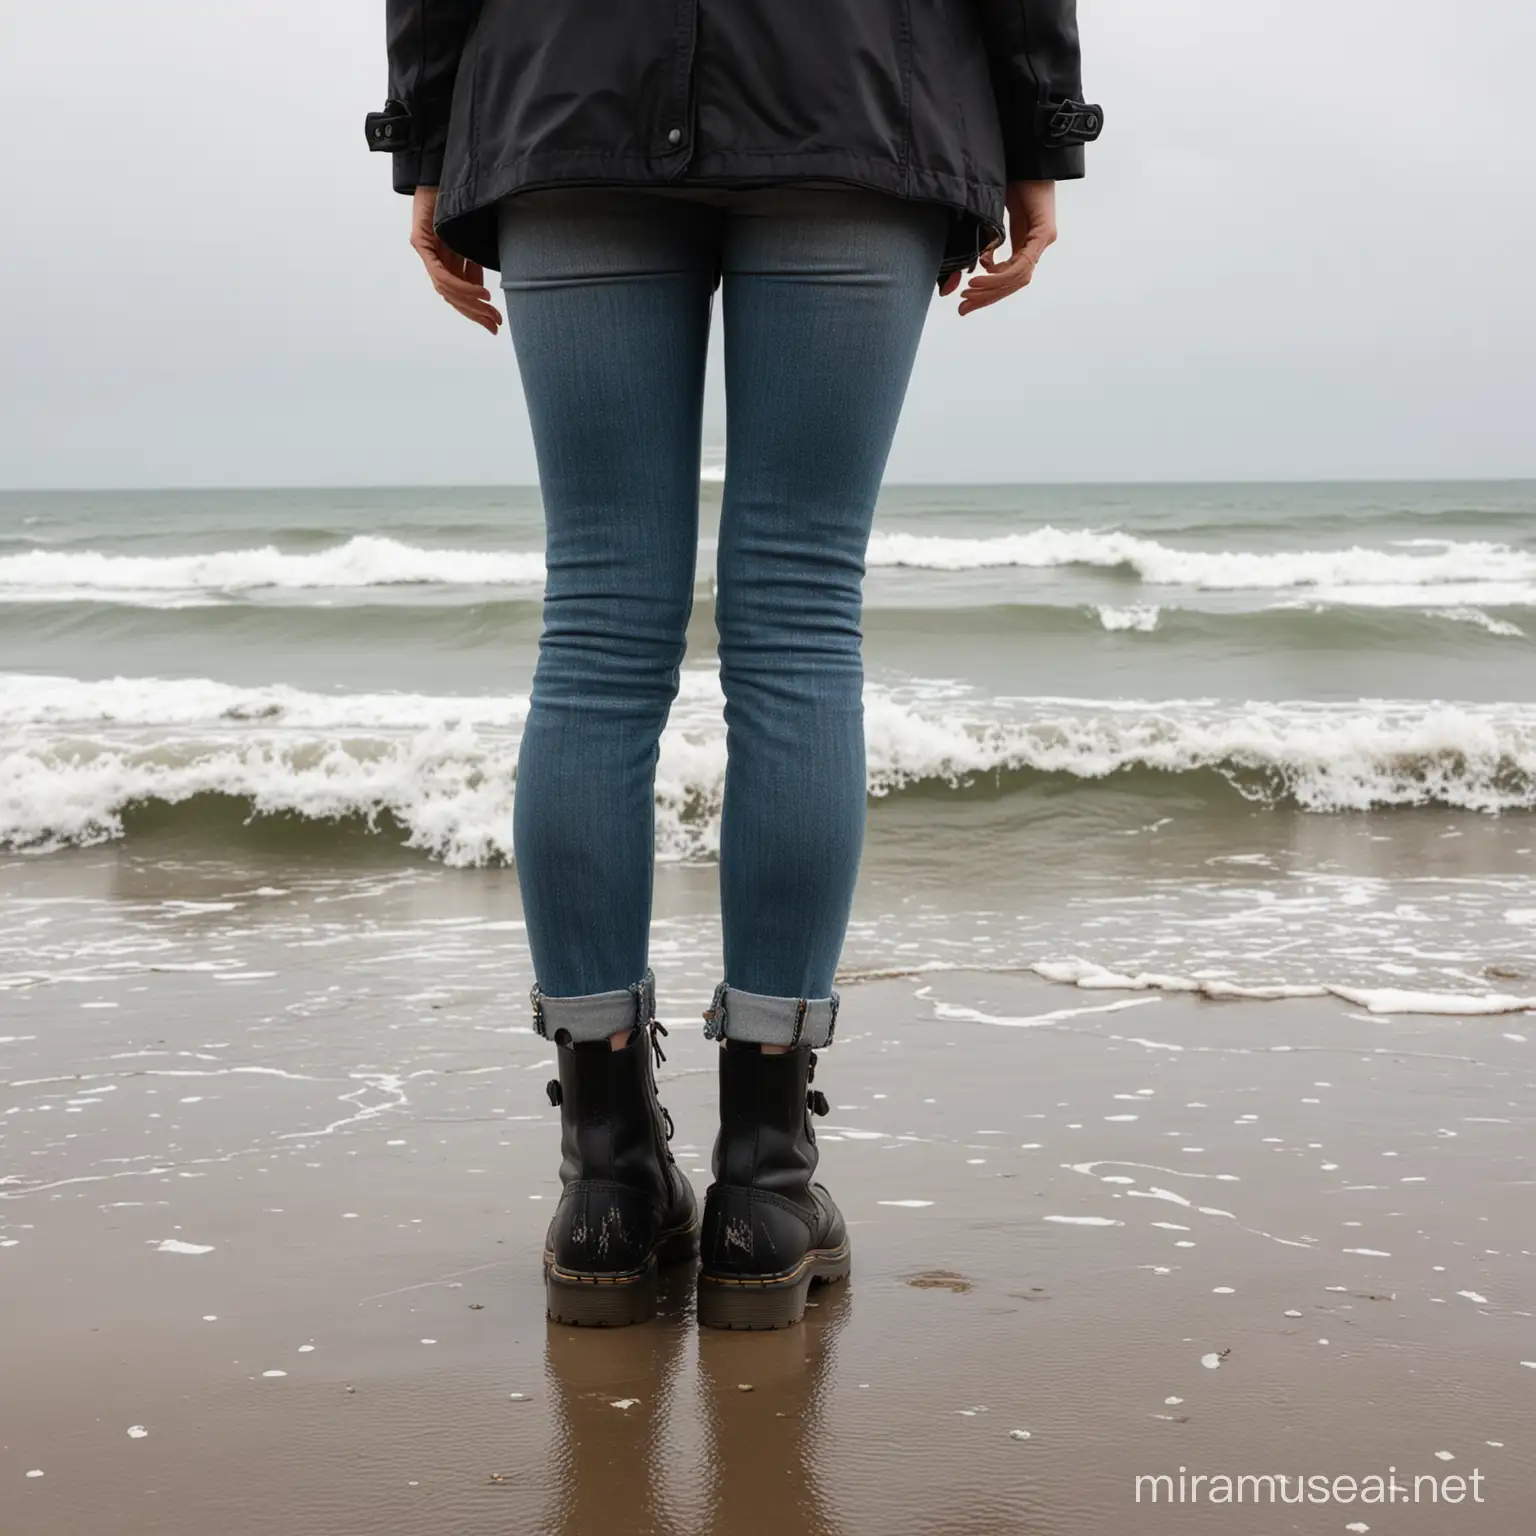 Woman staring out into ocean from beach wearing doc Martin boots,black oea coat, and ripped jeans full body view from behind